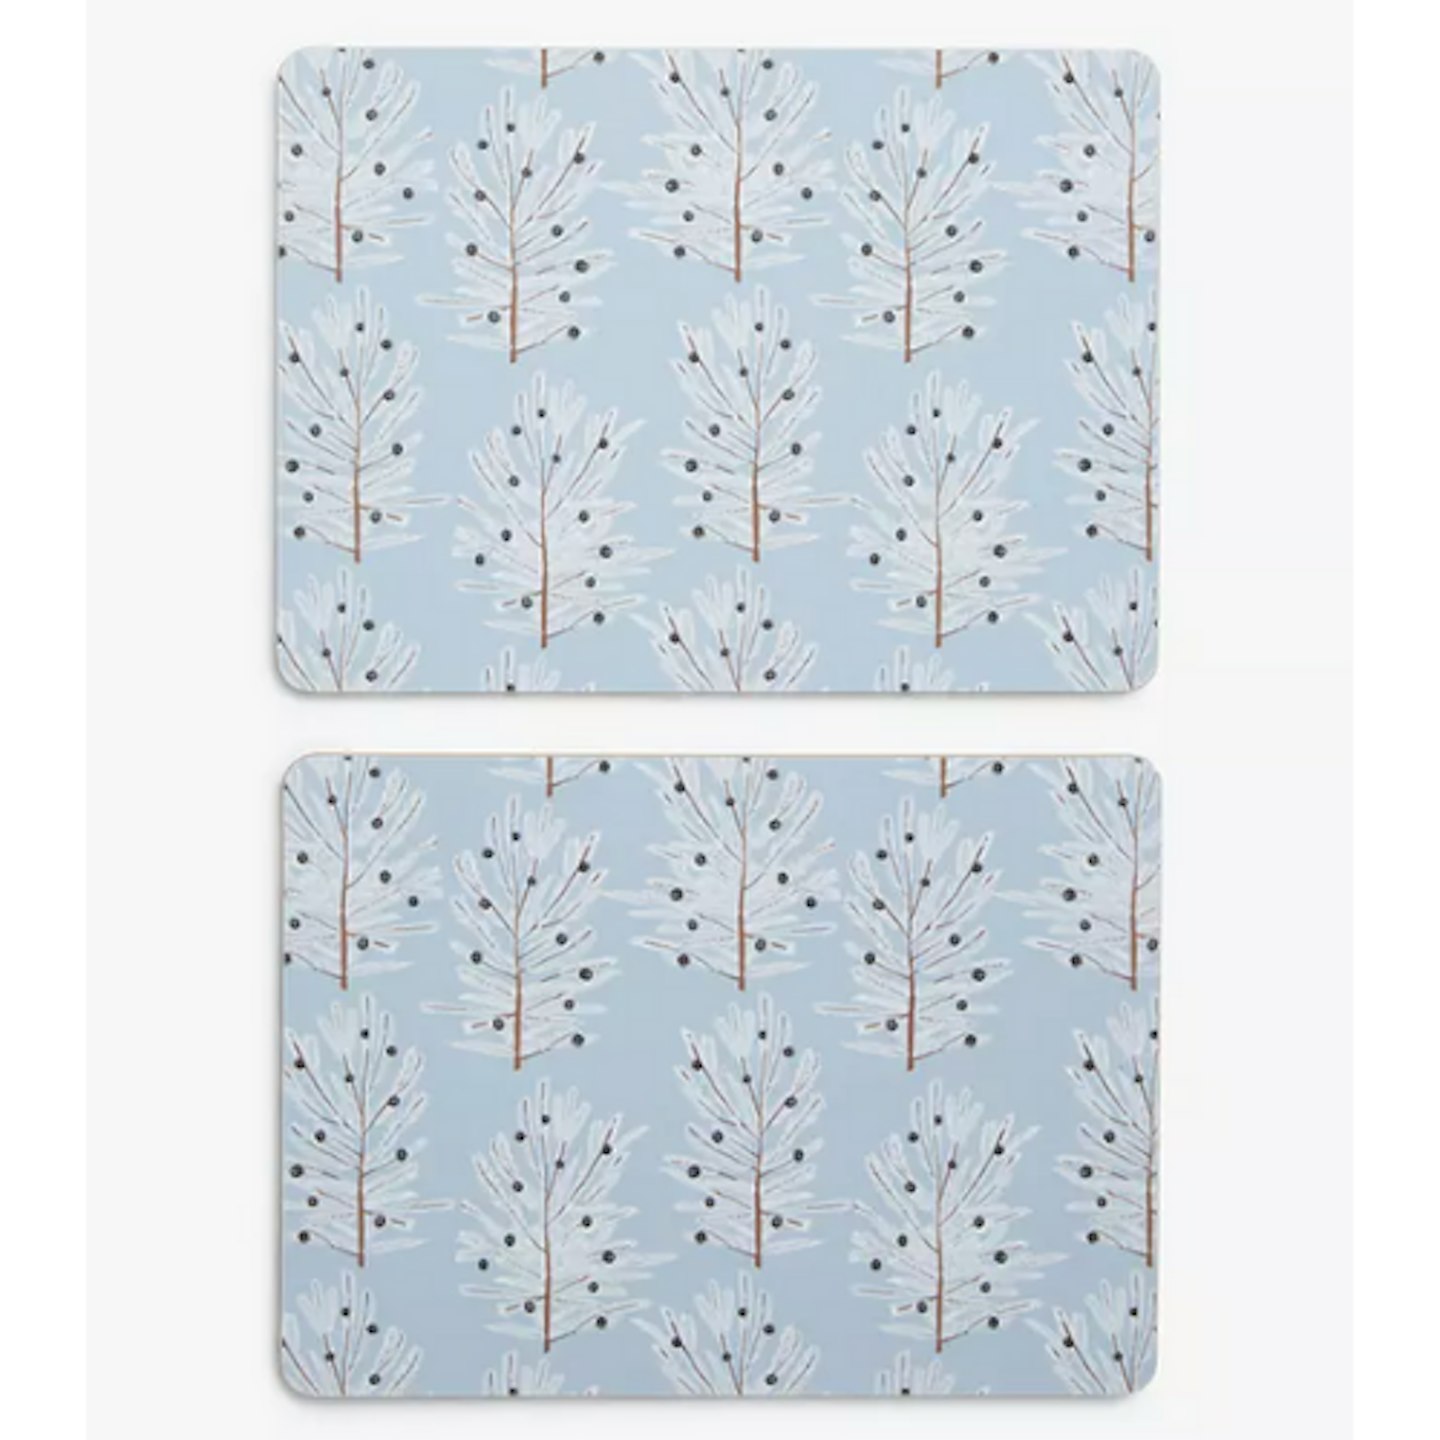 Christmas Table Placemats and Coasters: John Lewis & Partners Christmas Icy Tree Cork-Backed Melamine Placemats, Set of 2